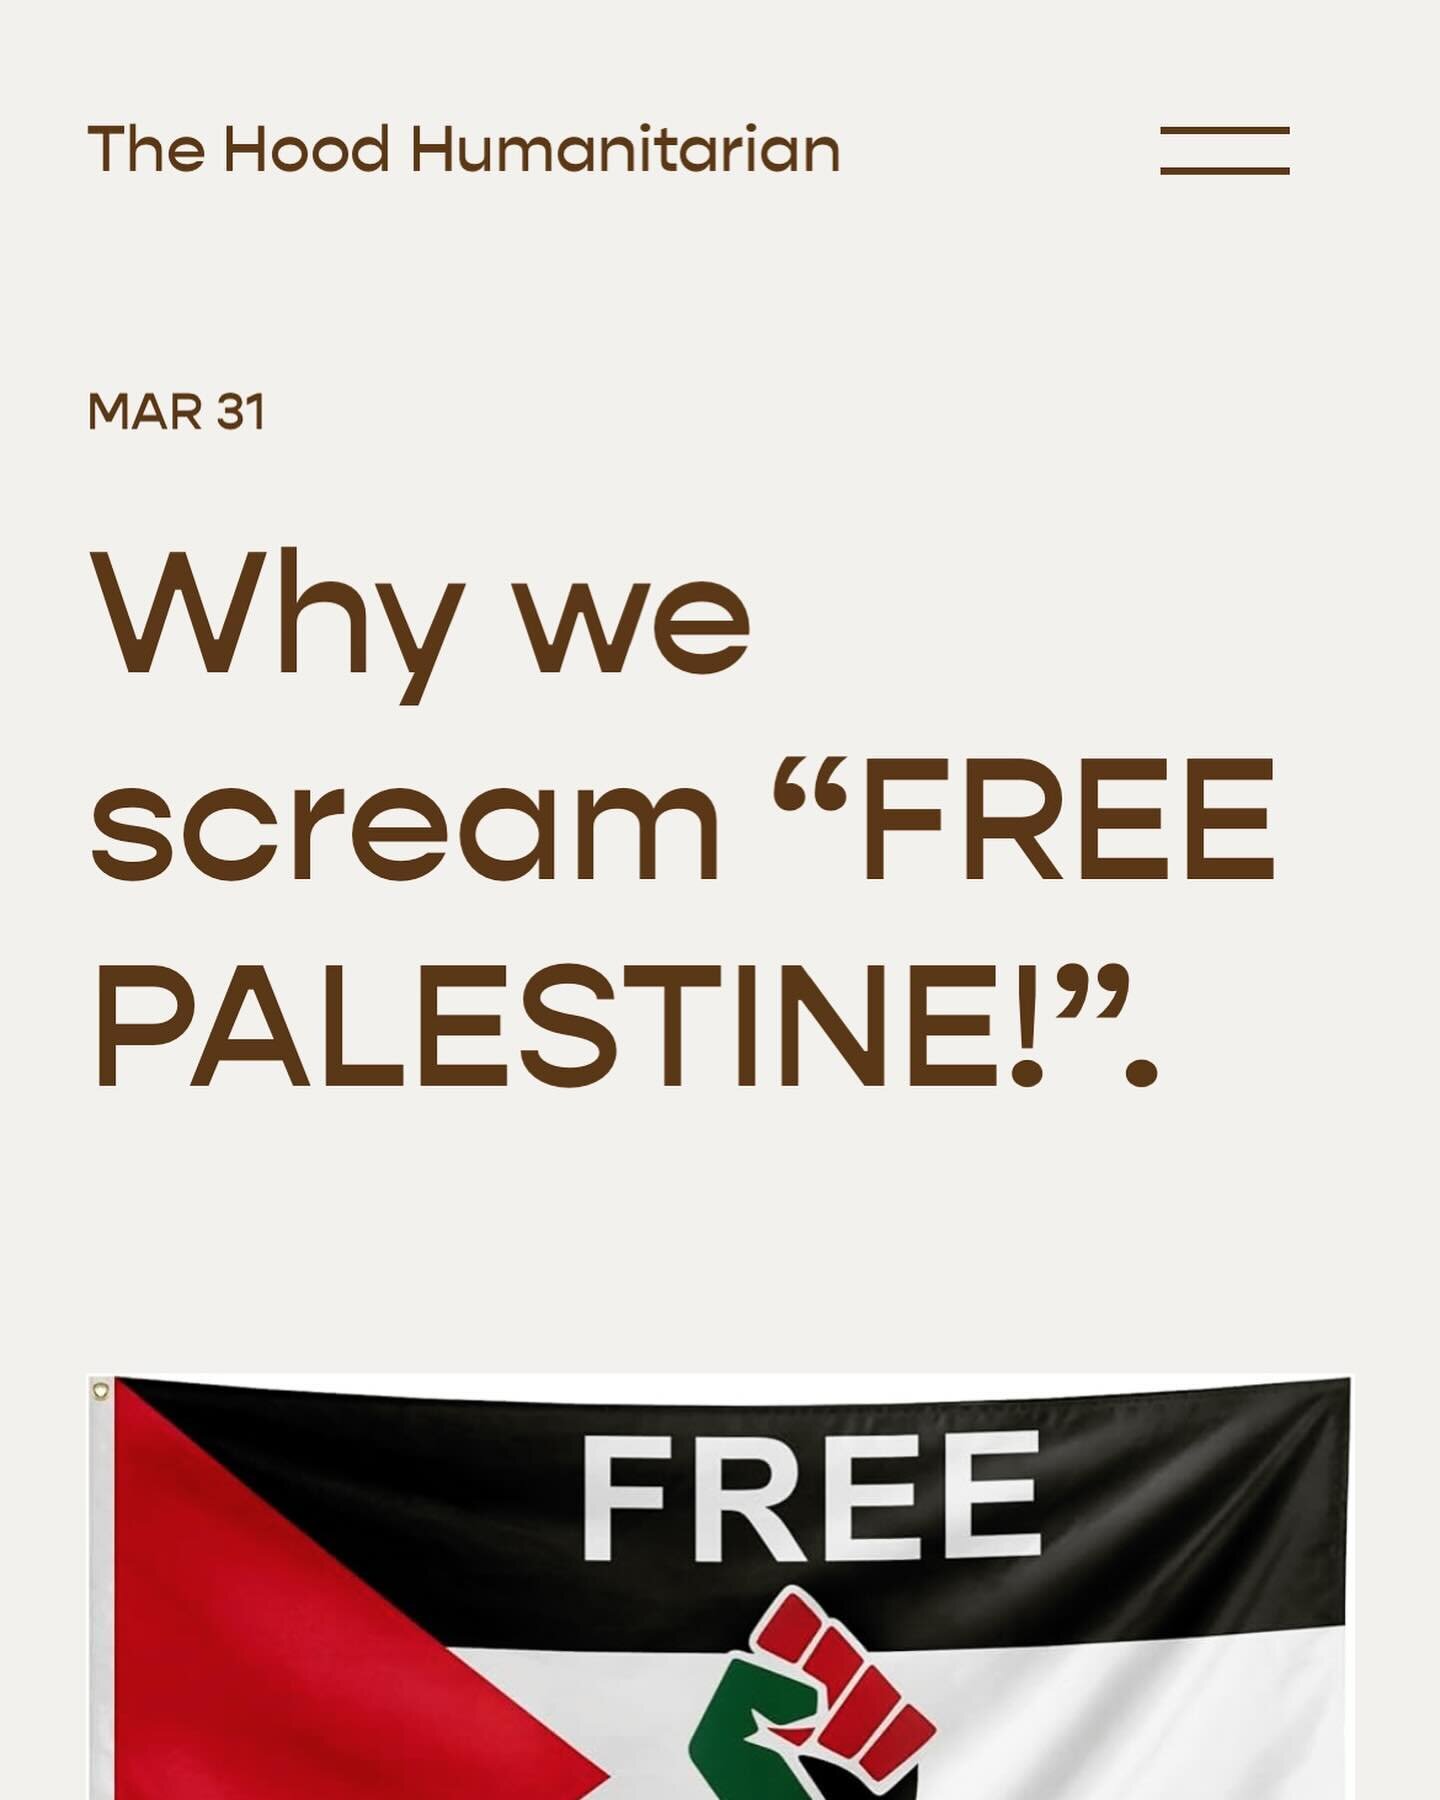 new blogpost alert. link in bio. this is a pop cultural topic that i have been excited to engage with on a public platform. i hope you enjoy it. #freepalestine